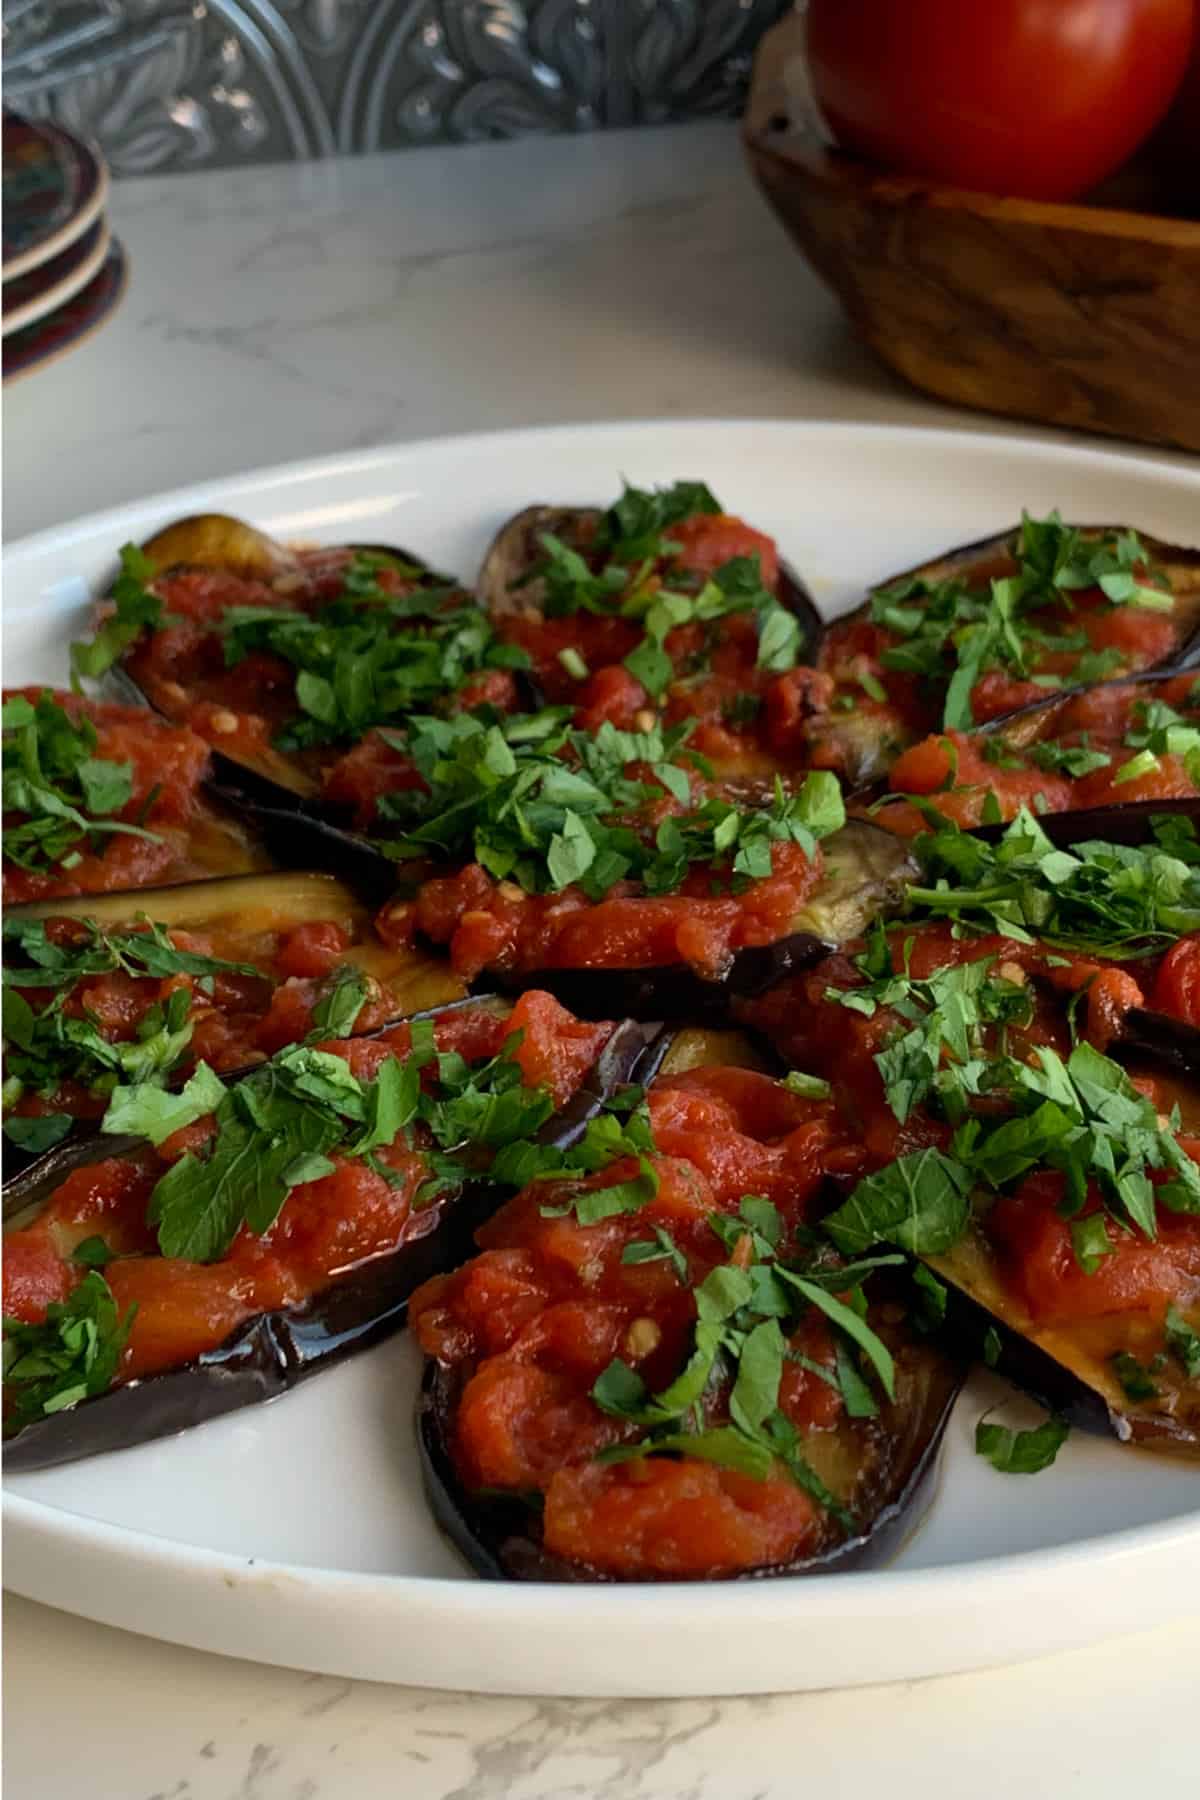 The Eggplant with Tomato Confit served on a dish. 